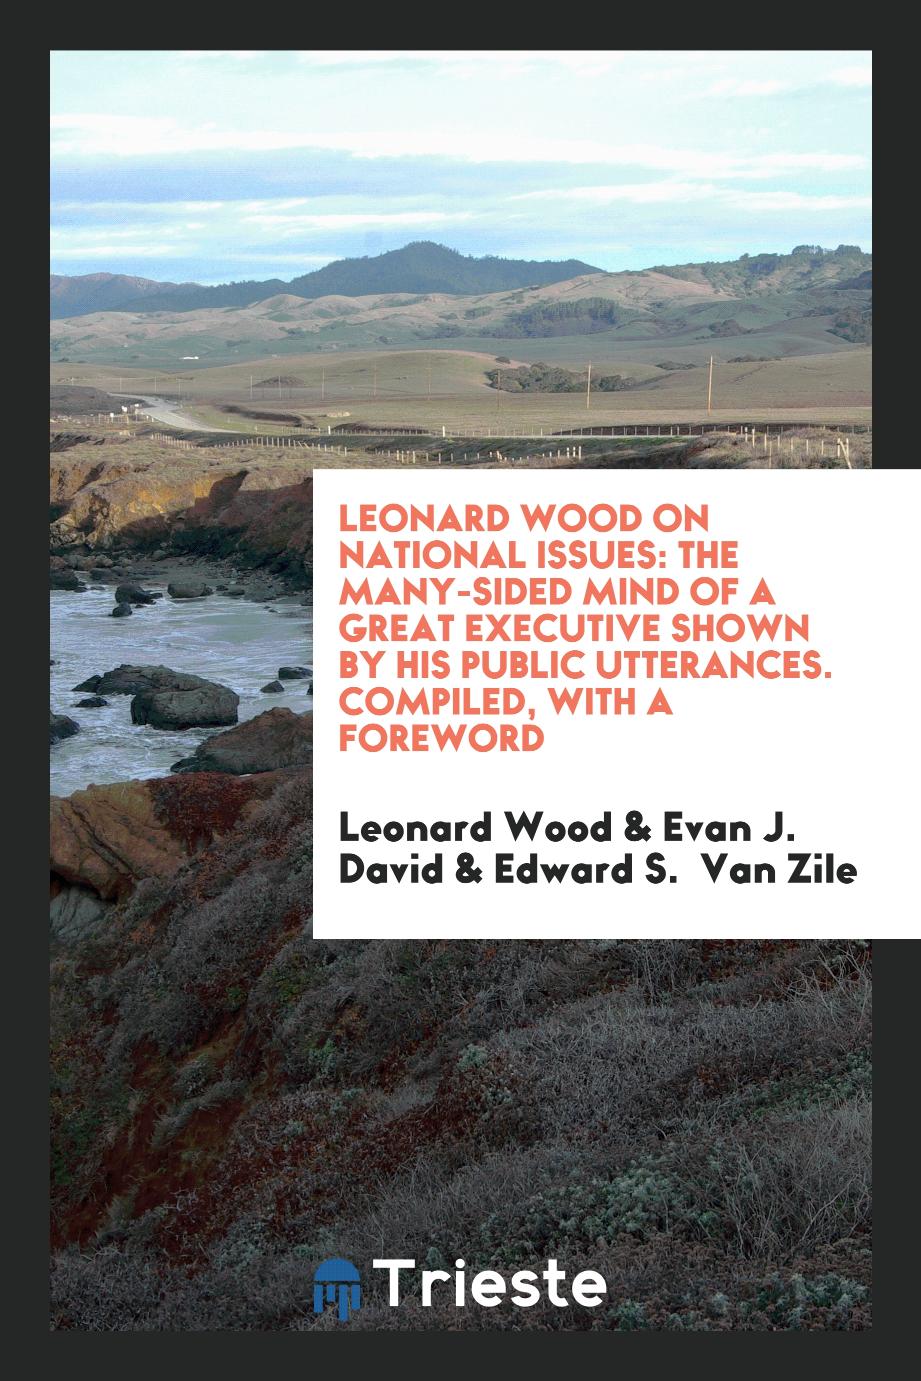 Leonard Wood on National Issues: The Many-Sided Mind of a Great Executive Shown by His Public Utterances. Compiled, with a Foreword